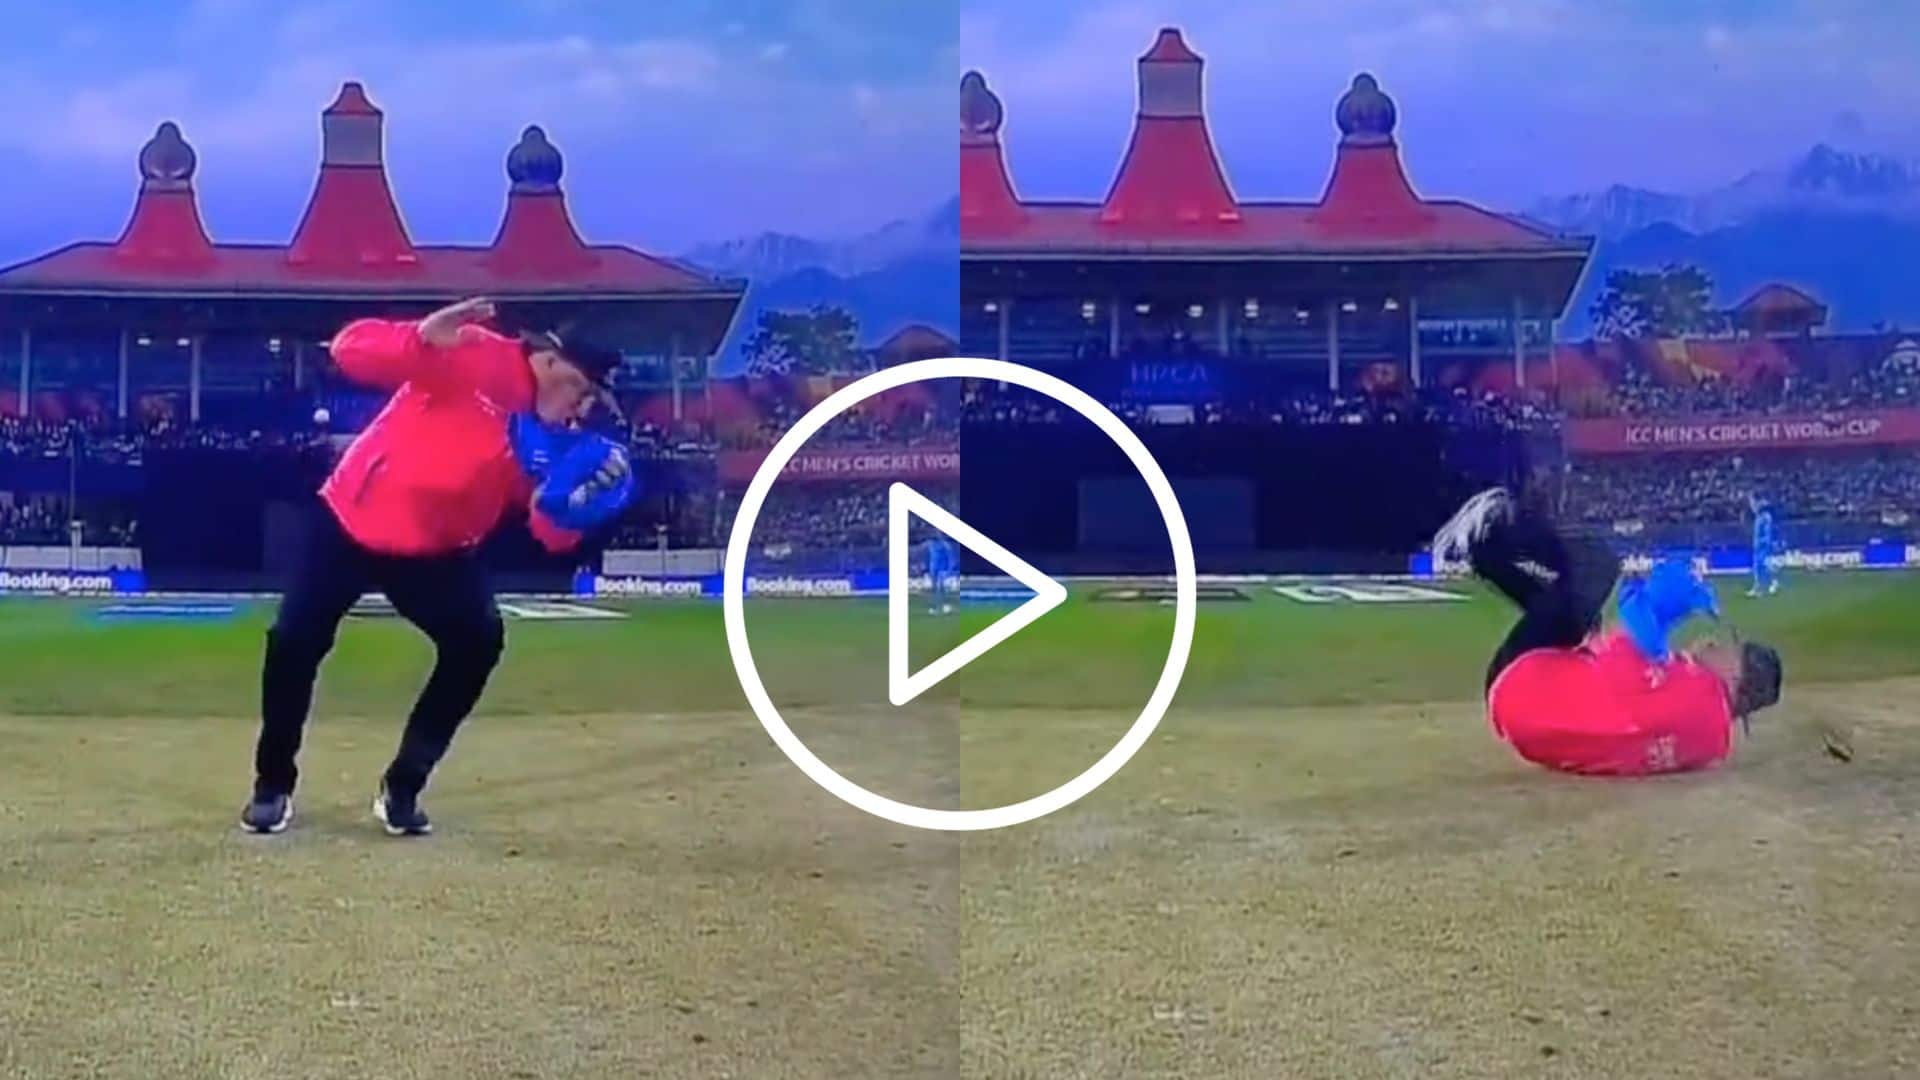 [Watch] Daryl Mitchell's Brute Force Propels Umpire Adrian Holdstock To Fall On The Floor